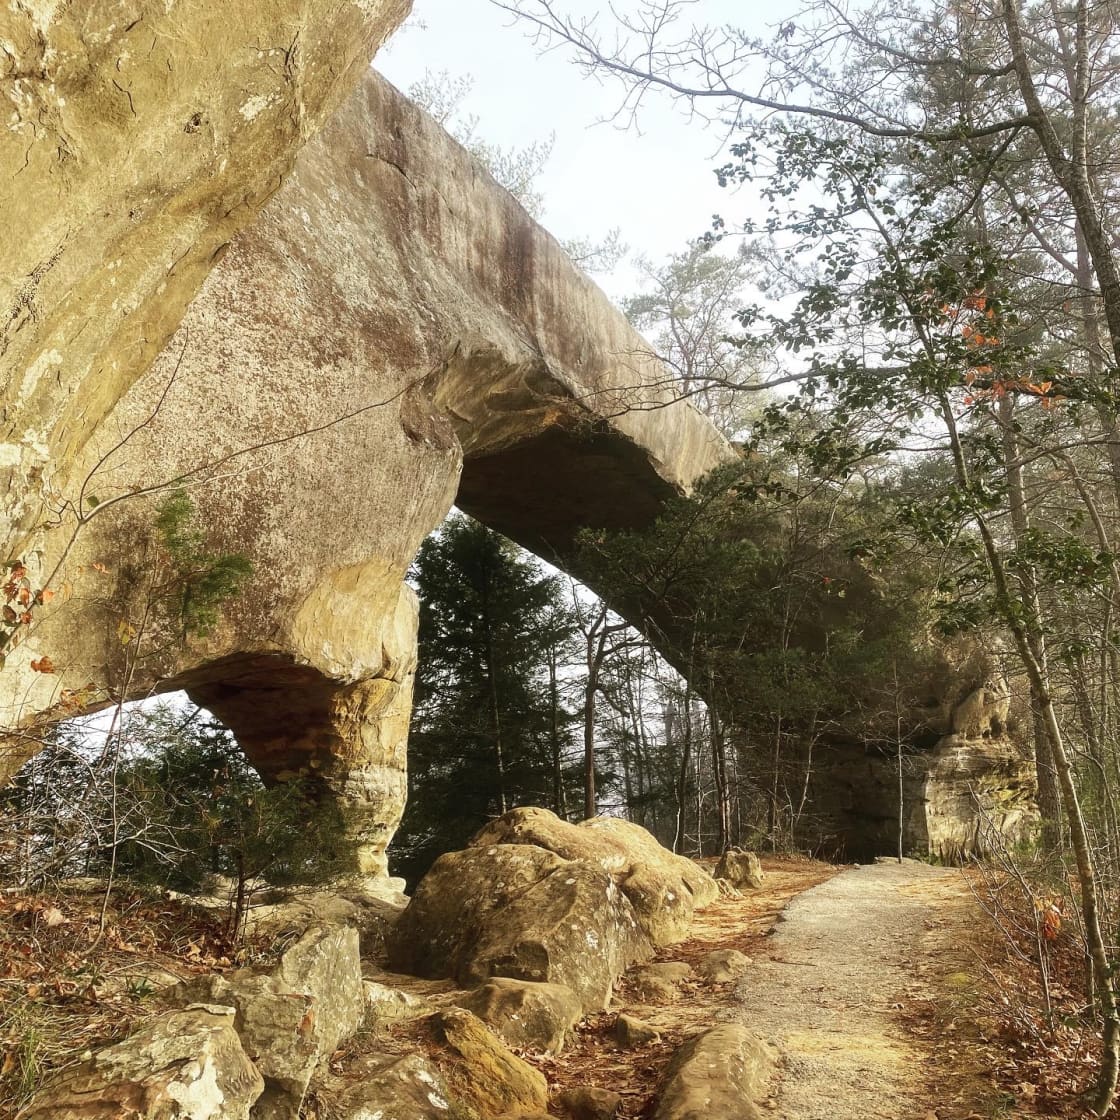 Red River Gorge 